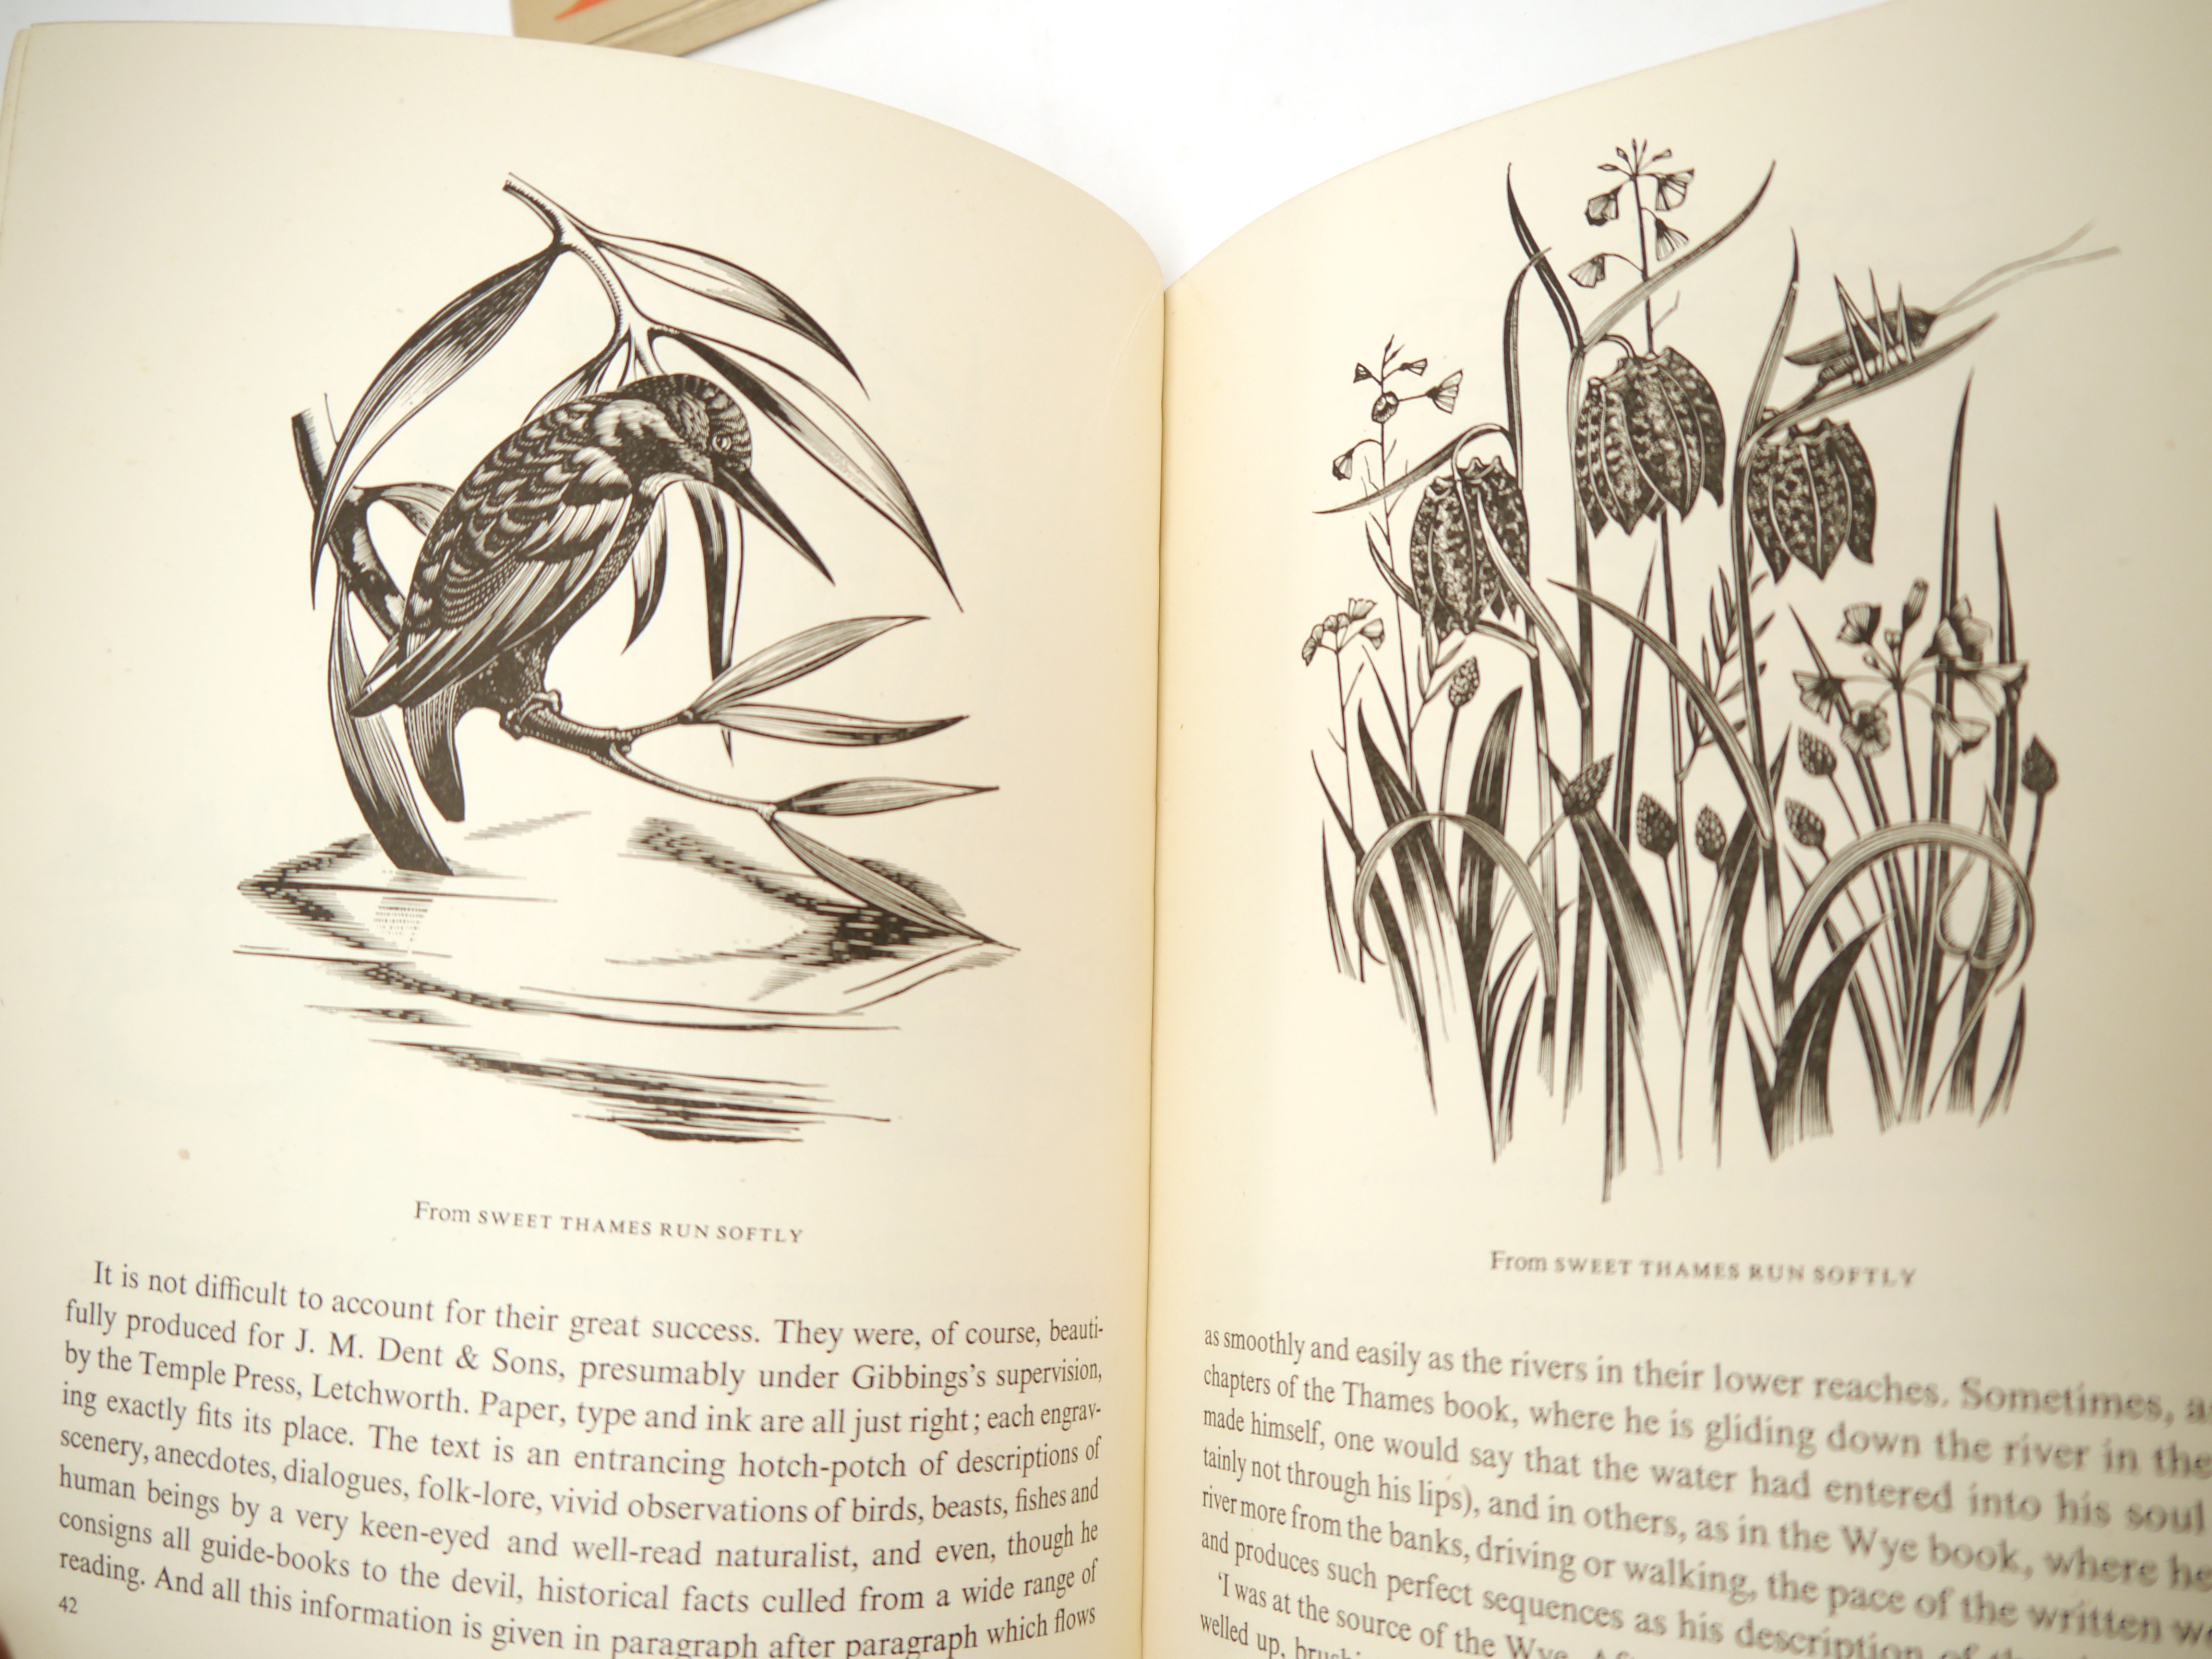 (Typography, Printing, Illustration, Early Ian Fleming in Print.), 'Alphabet & Image', Shenval - Image 31 of 31